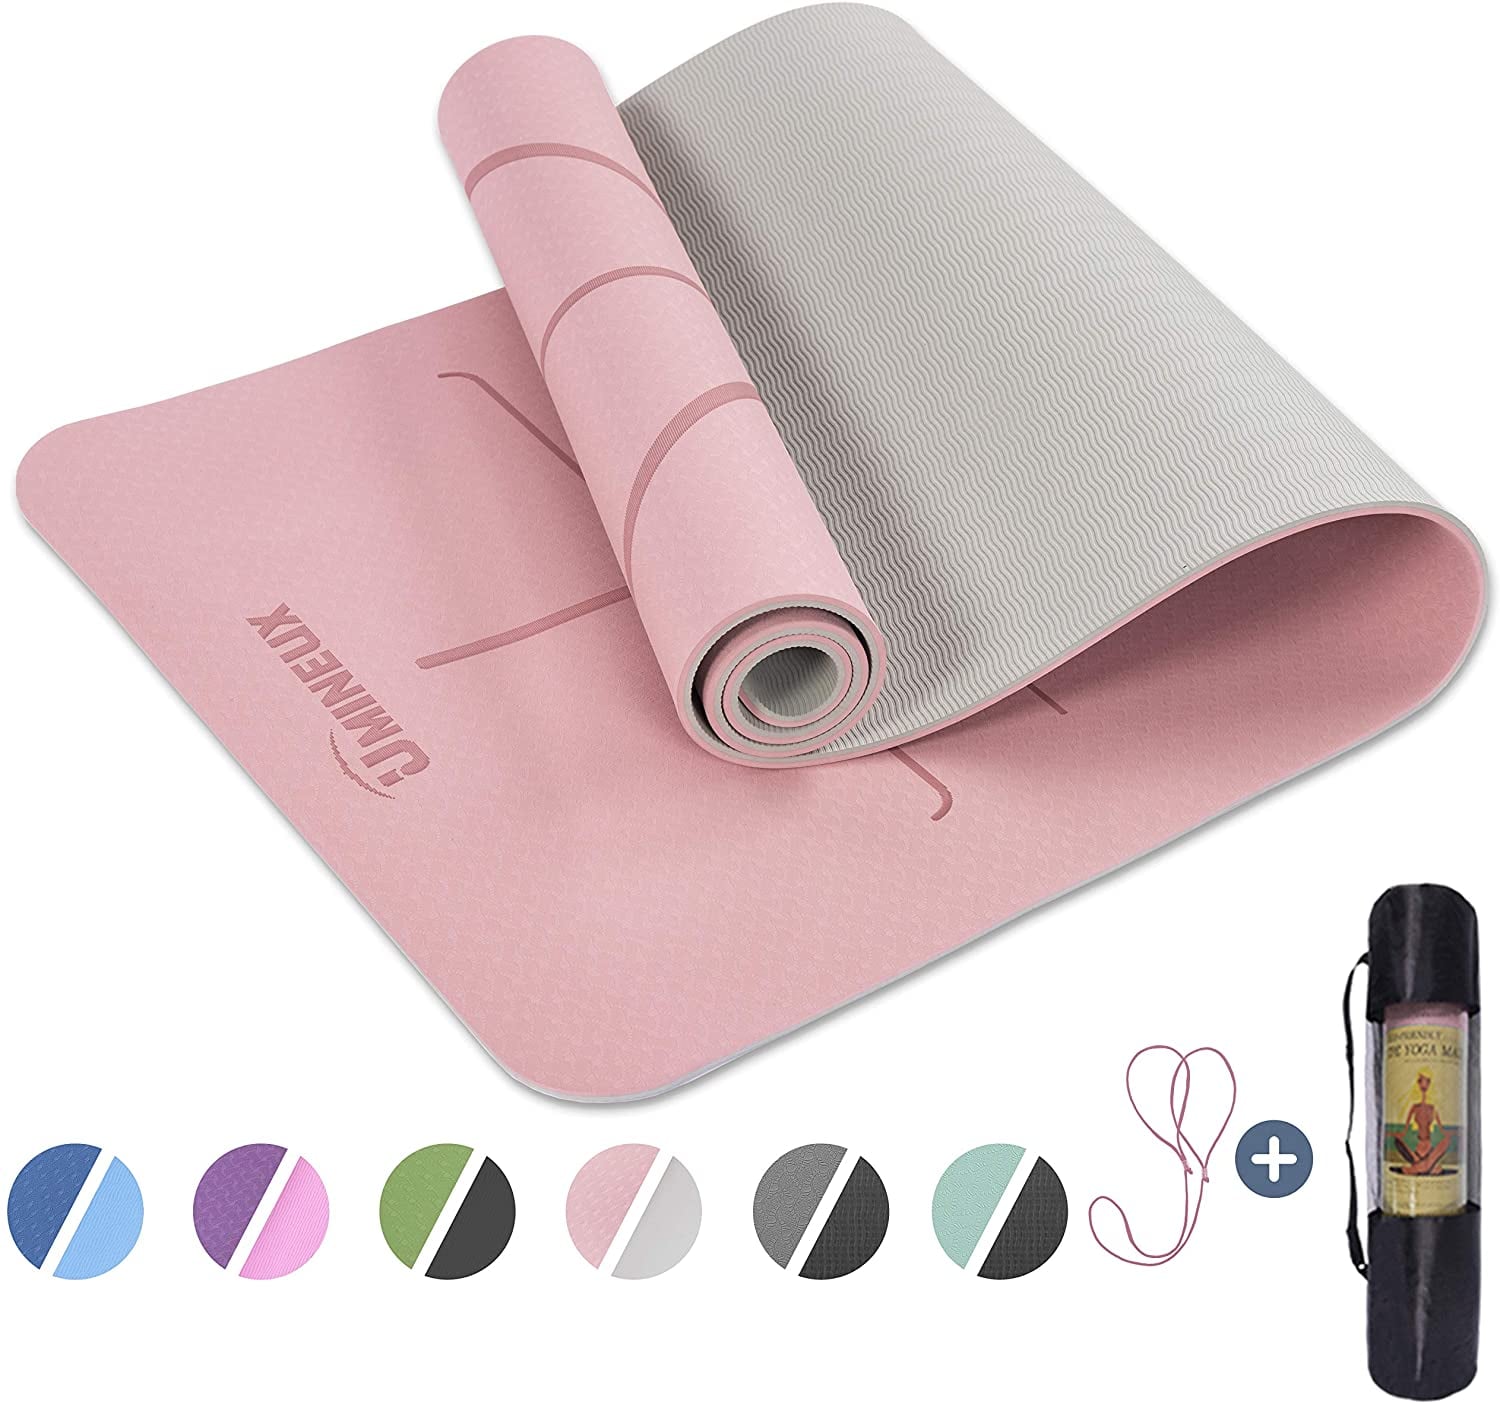 An At-Home Gym Find: Umineux Yoga Mat, 16 Picks on Suni Lee's  Gift  Guide That Will Take the Gold This Holiday Season